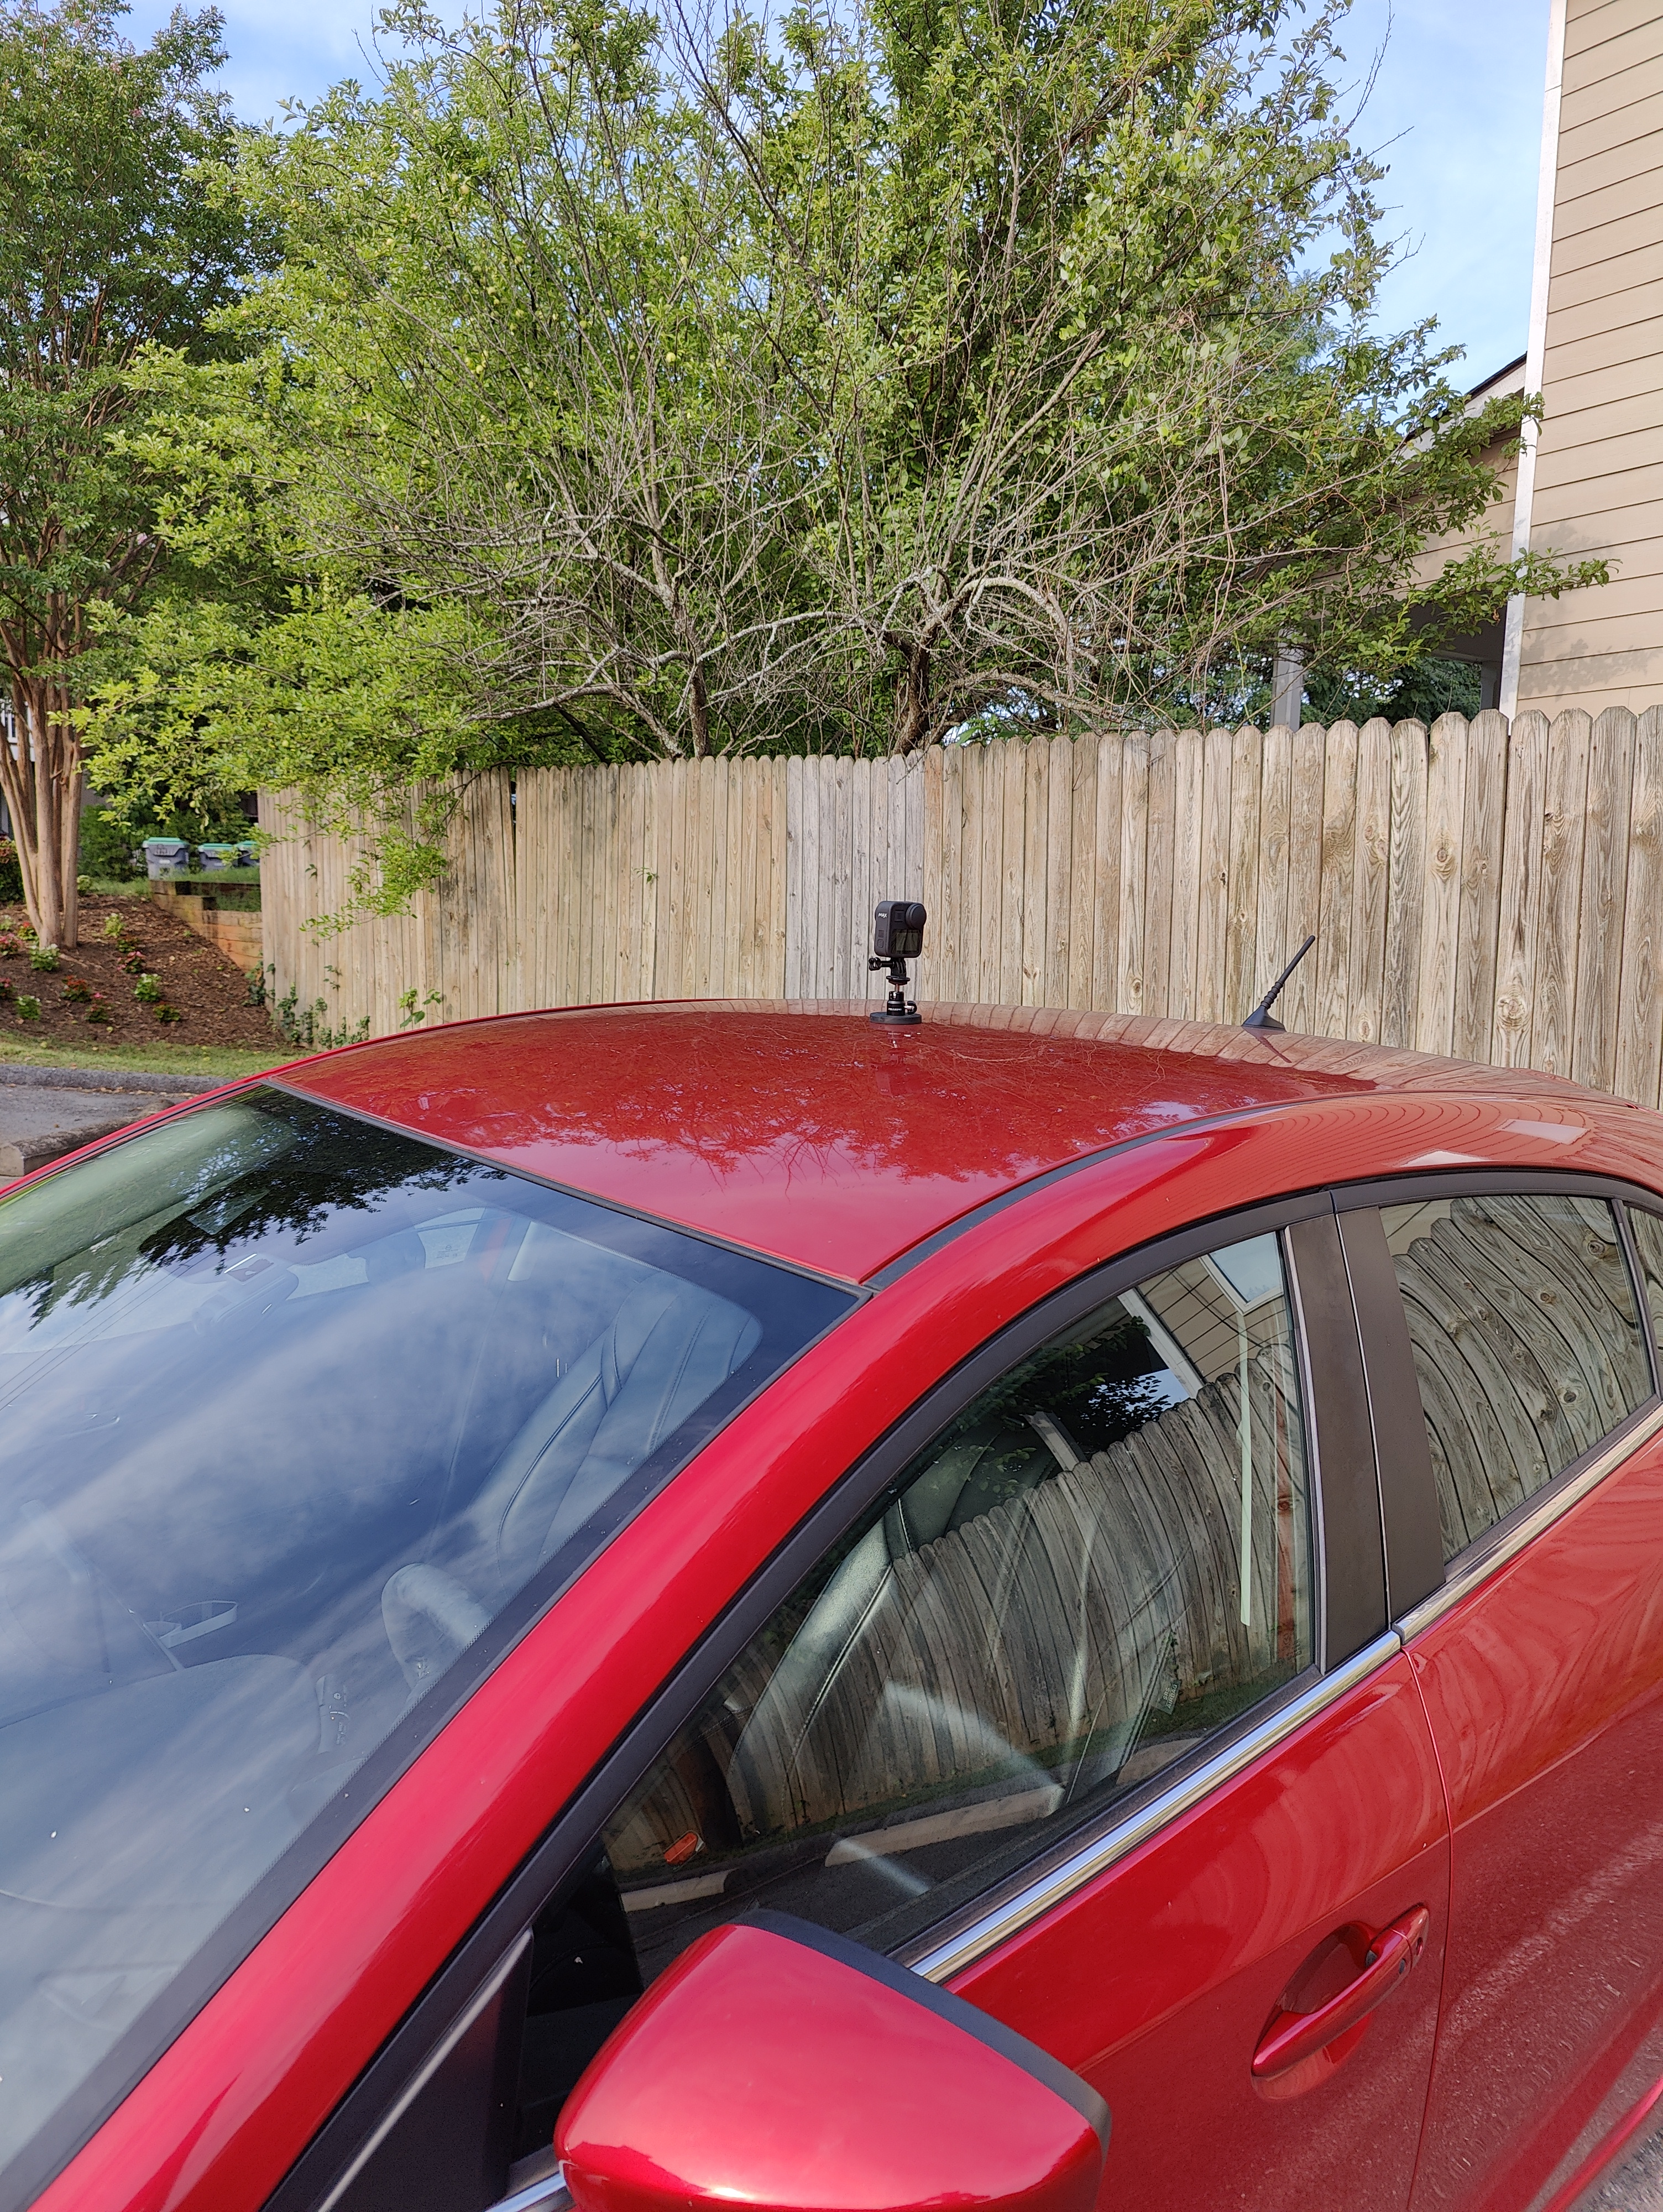 A gopro MAX mounted magnetically on my car